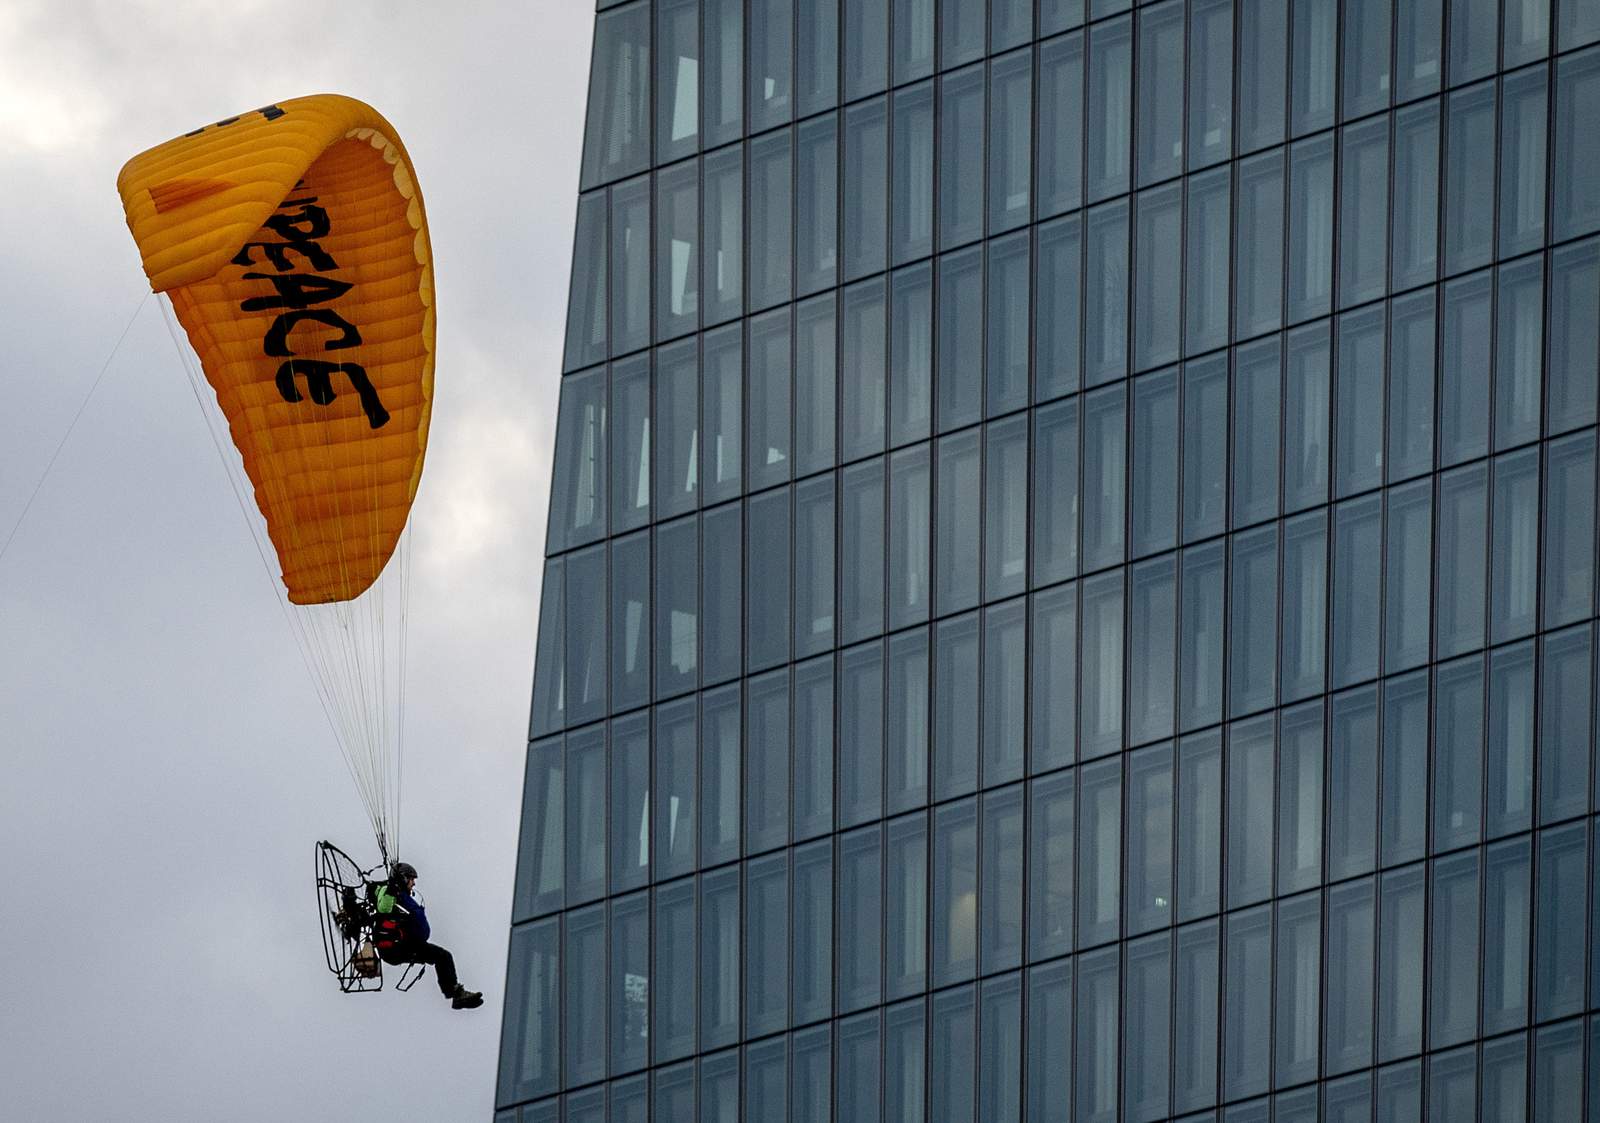 Greenpeace apologises for injuries caused by parachuting protester